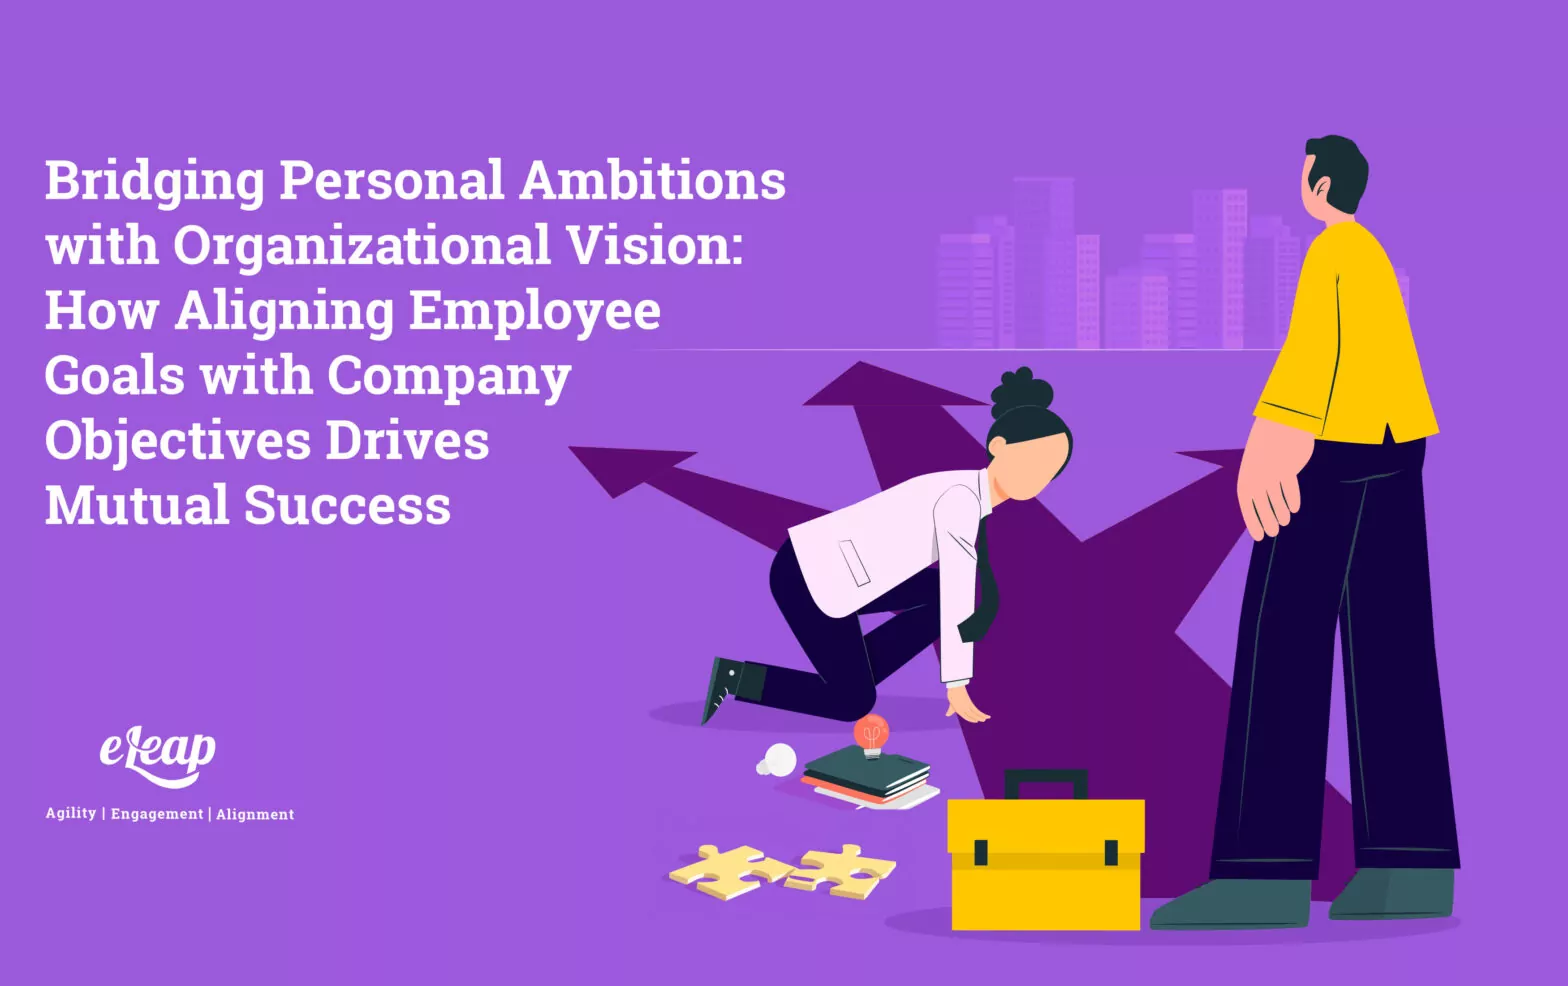 Bridging Personal Ambitions with Organizational Vision: How Aligning Employee Goals with Company Objectives Drives Mutual Success